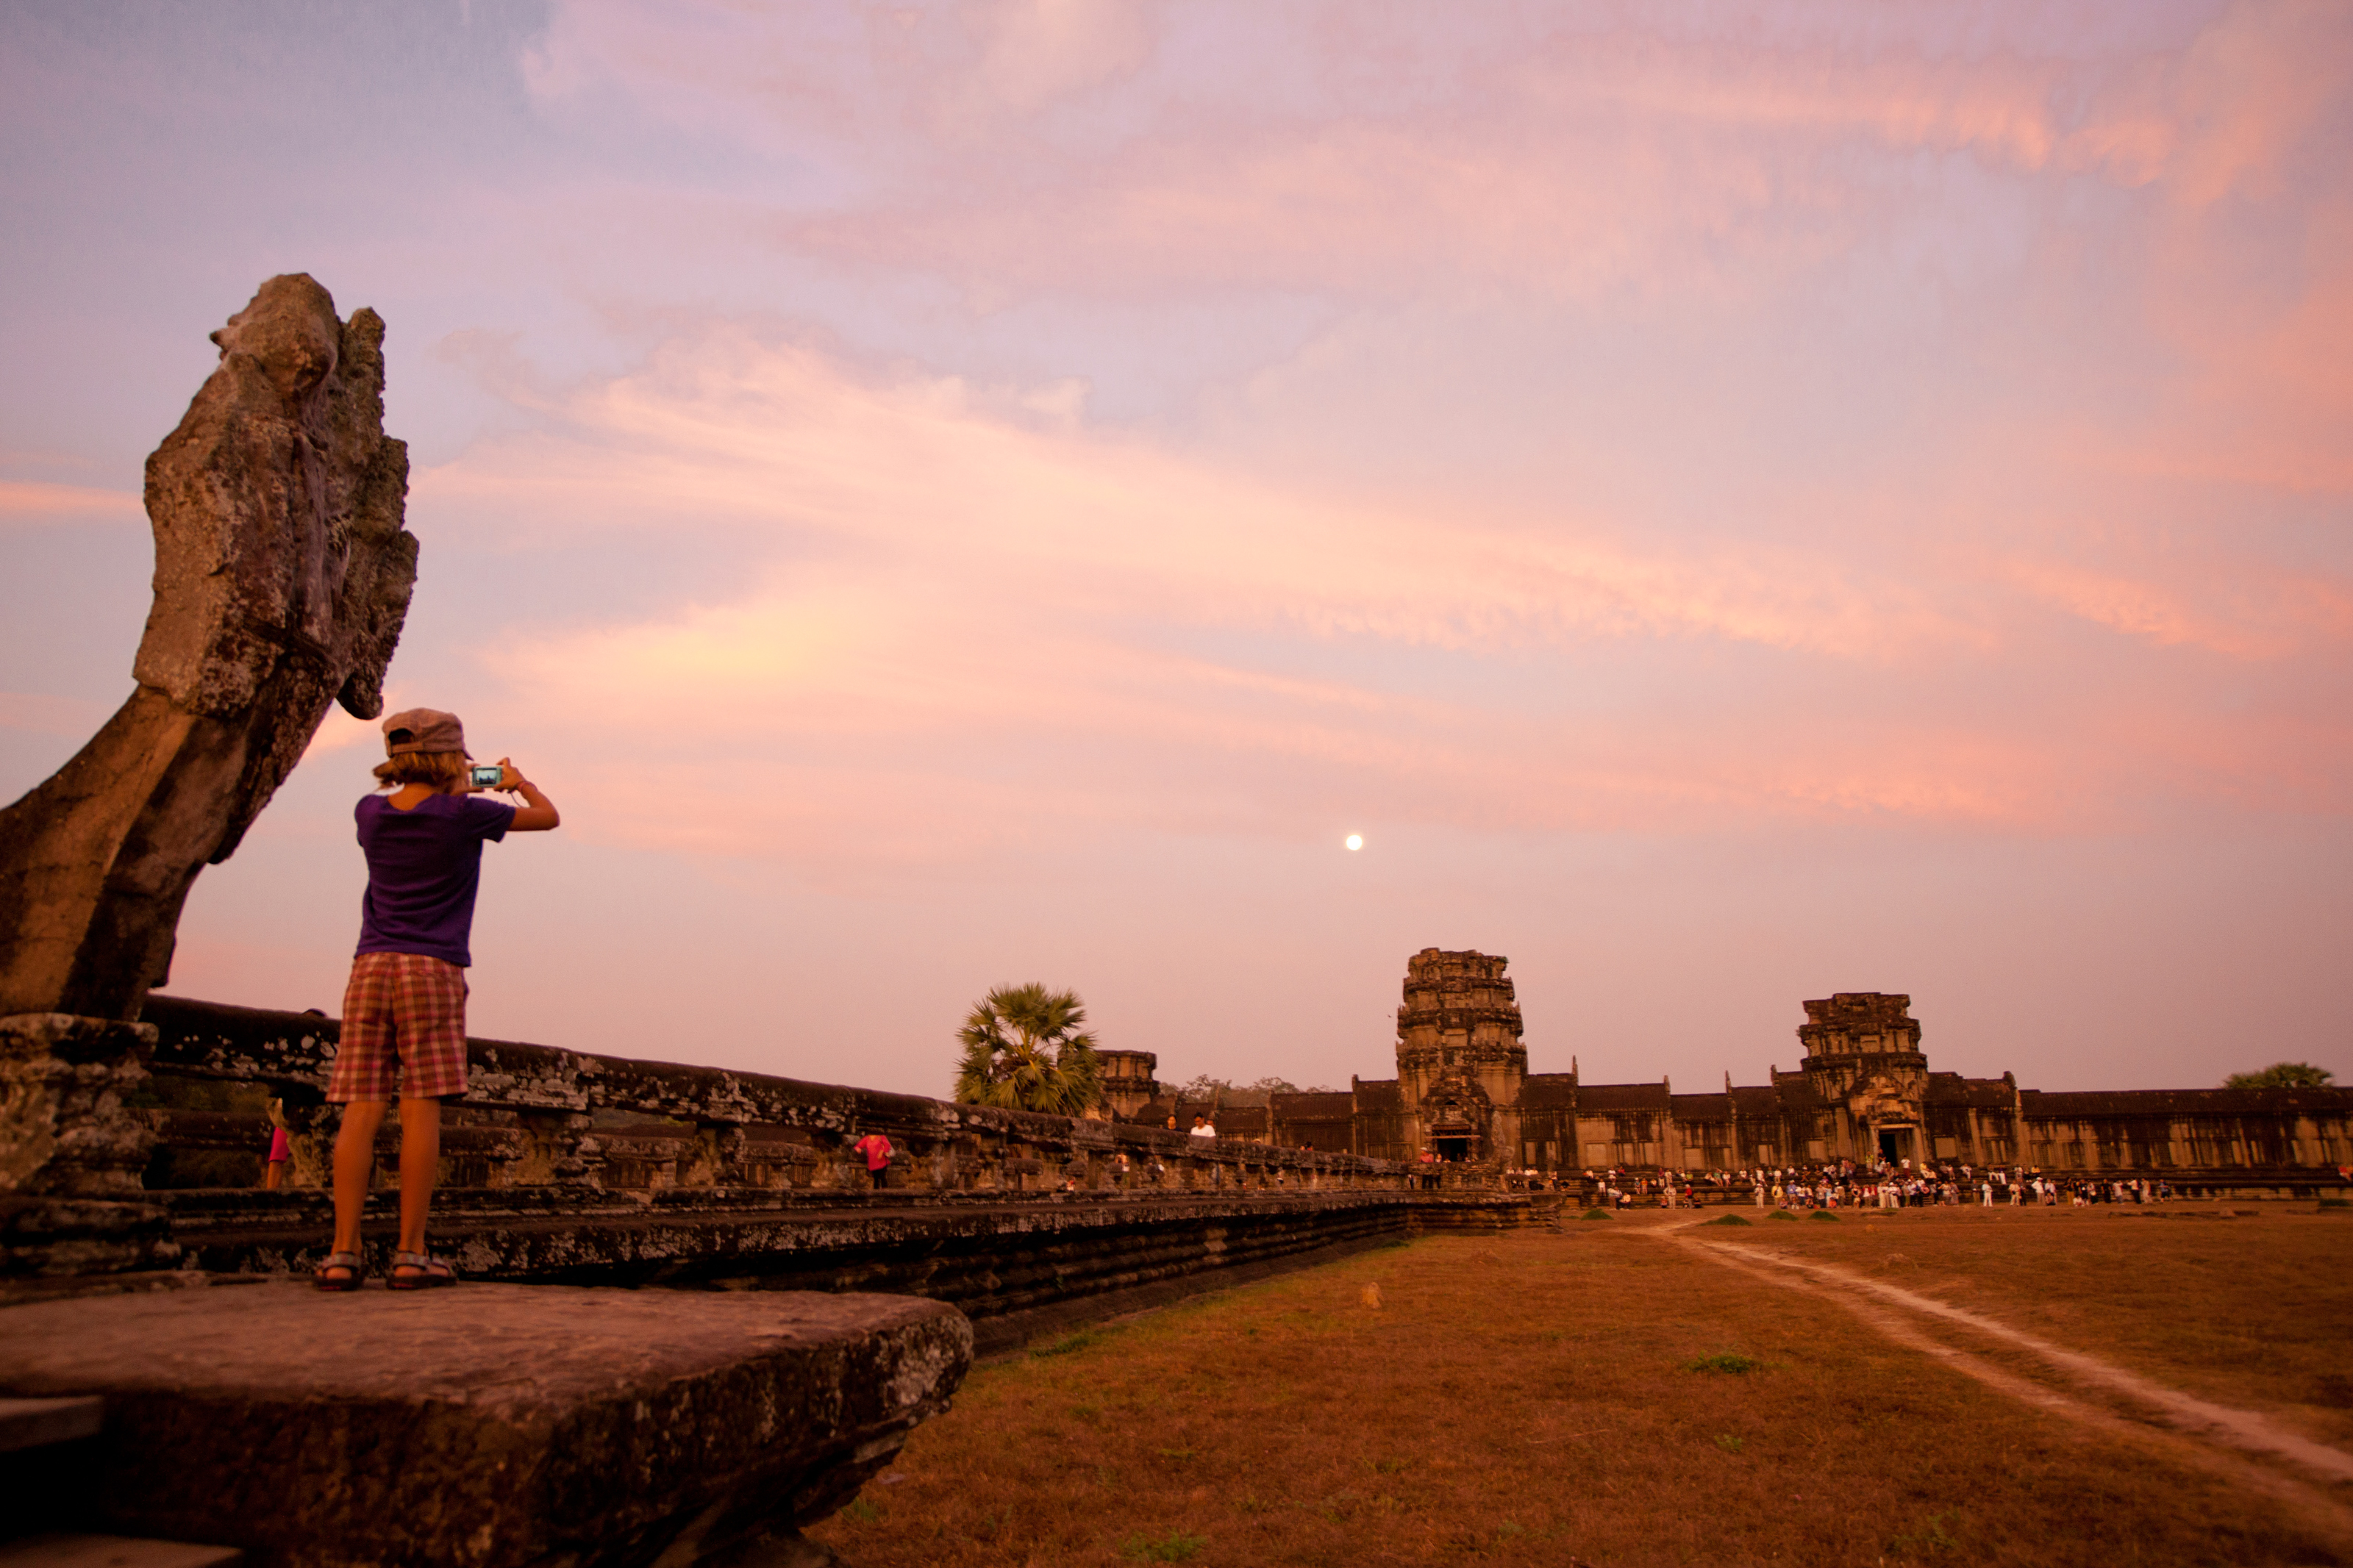 How to Capture Drama in Your Travel Photos from Me Ra Koh in Angkor Wat, Cambodia